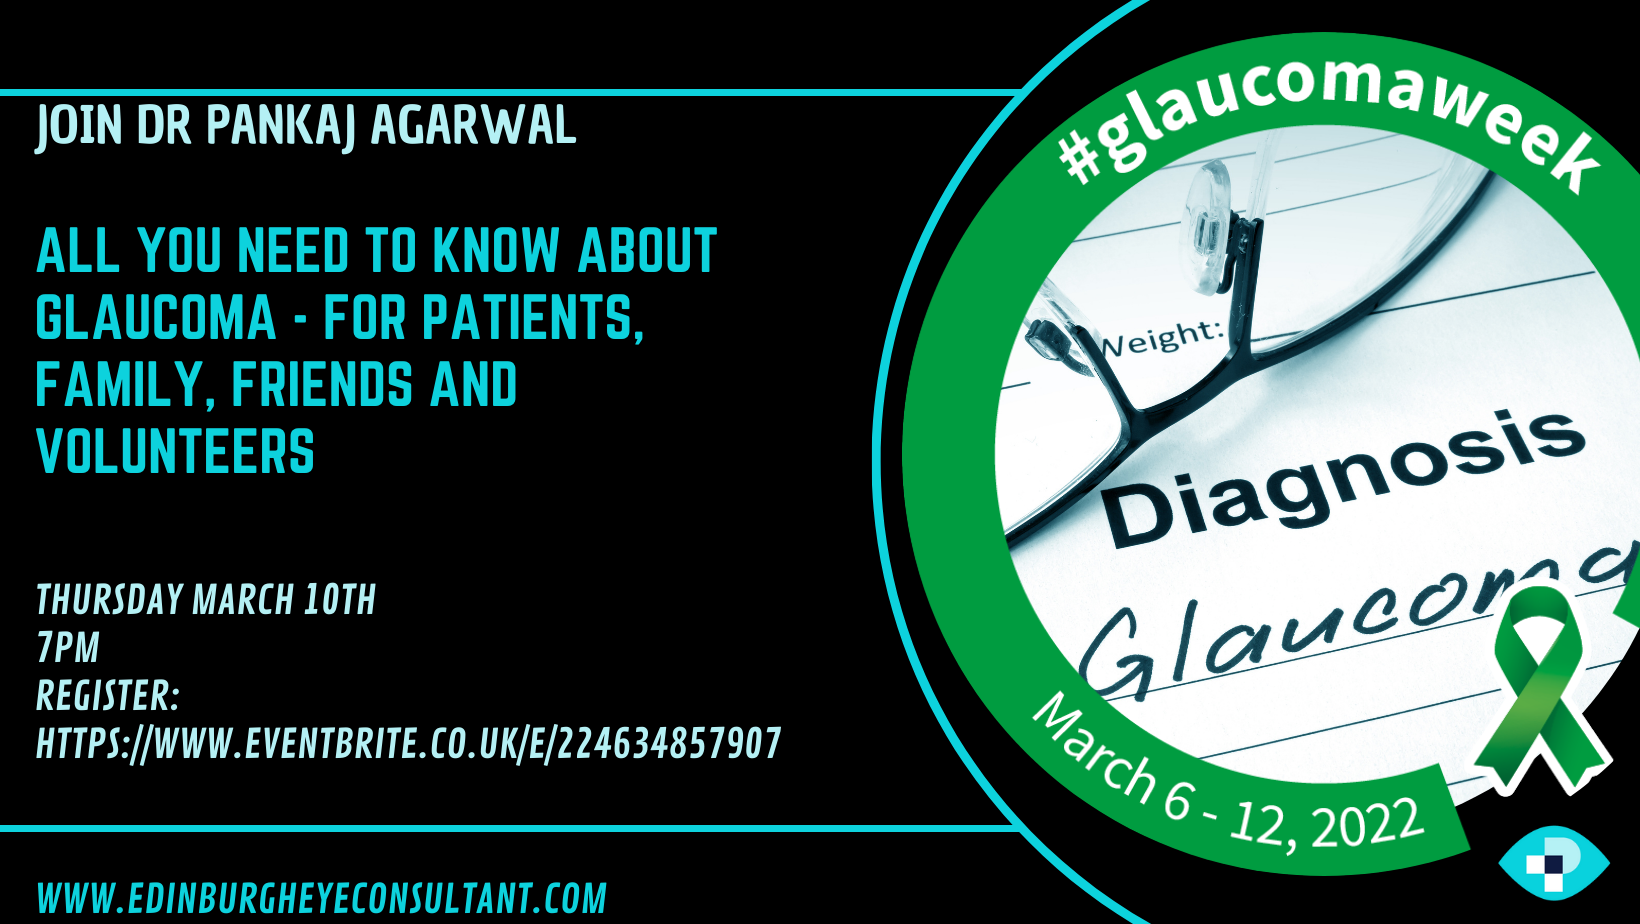 All you need to know about Glaucoma - Free online event - Thursday 10th March 2022 at 7pm